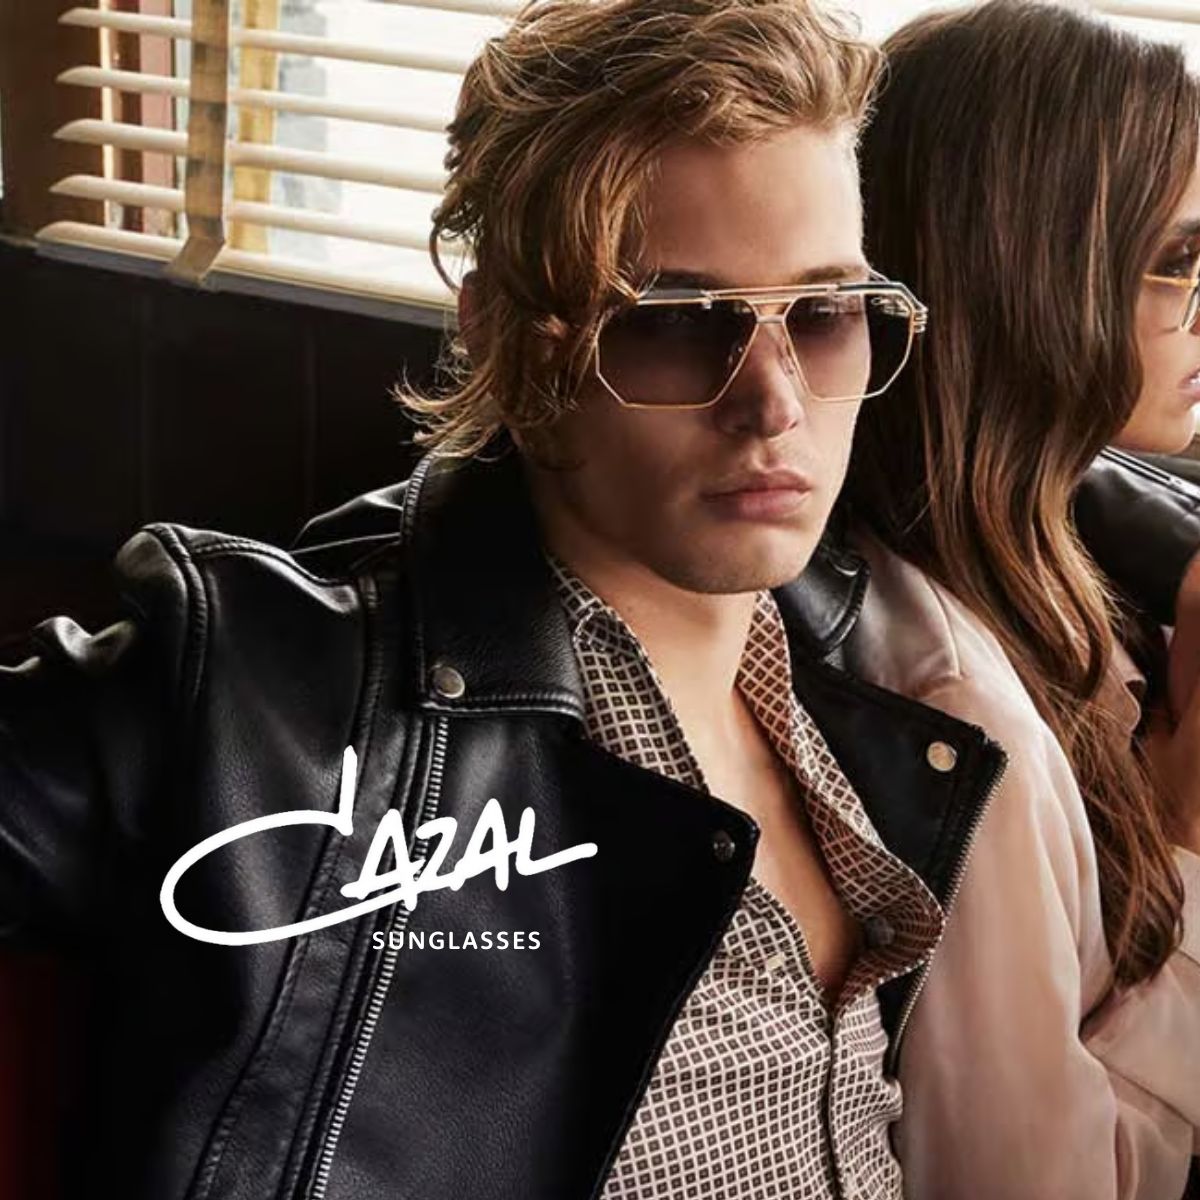 "Assortment of premium and luxury Cazal unisex sunglasses featuring stylish shades and fashionable goggles for a sophisticated look, available on Optorium."